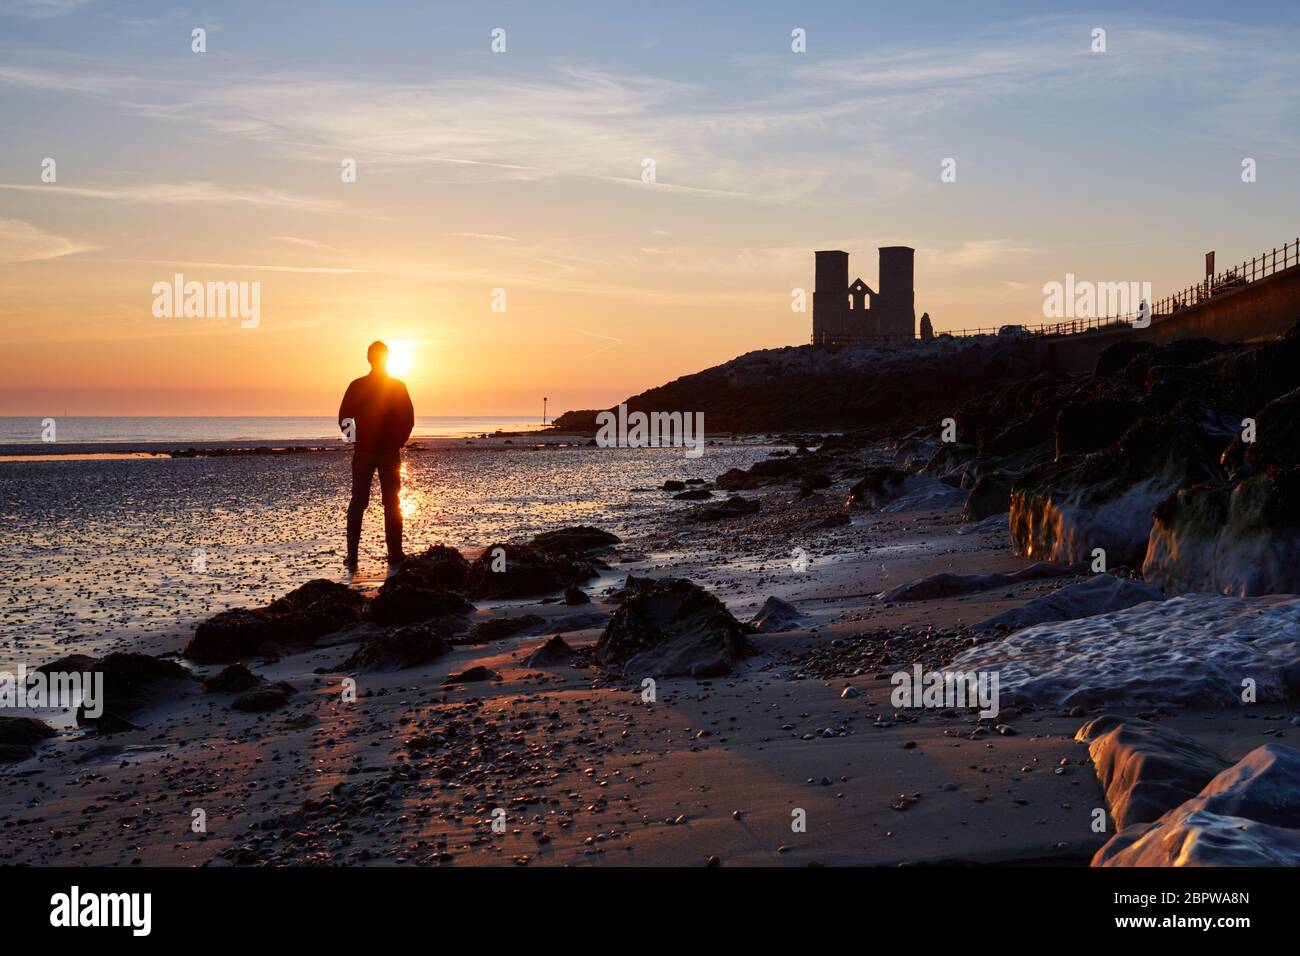 Reculver, Kent, UK. 20th May 2020: UK Weather. A man watches sunrise at Reculver Towers as the tide recedes on what is forecast to be one of the hottest days of the year so far. Credit: Alan Payton/Alamy Live News Stock Photo